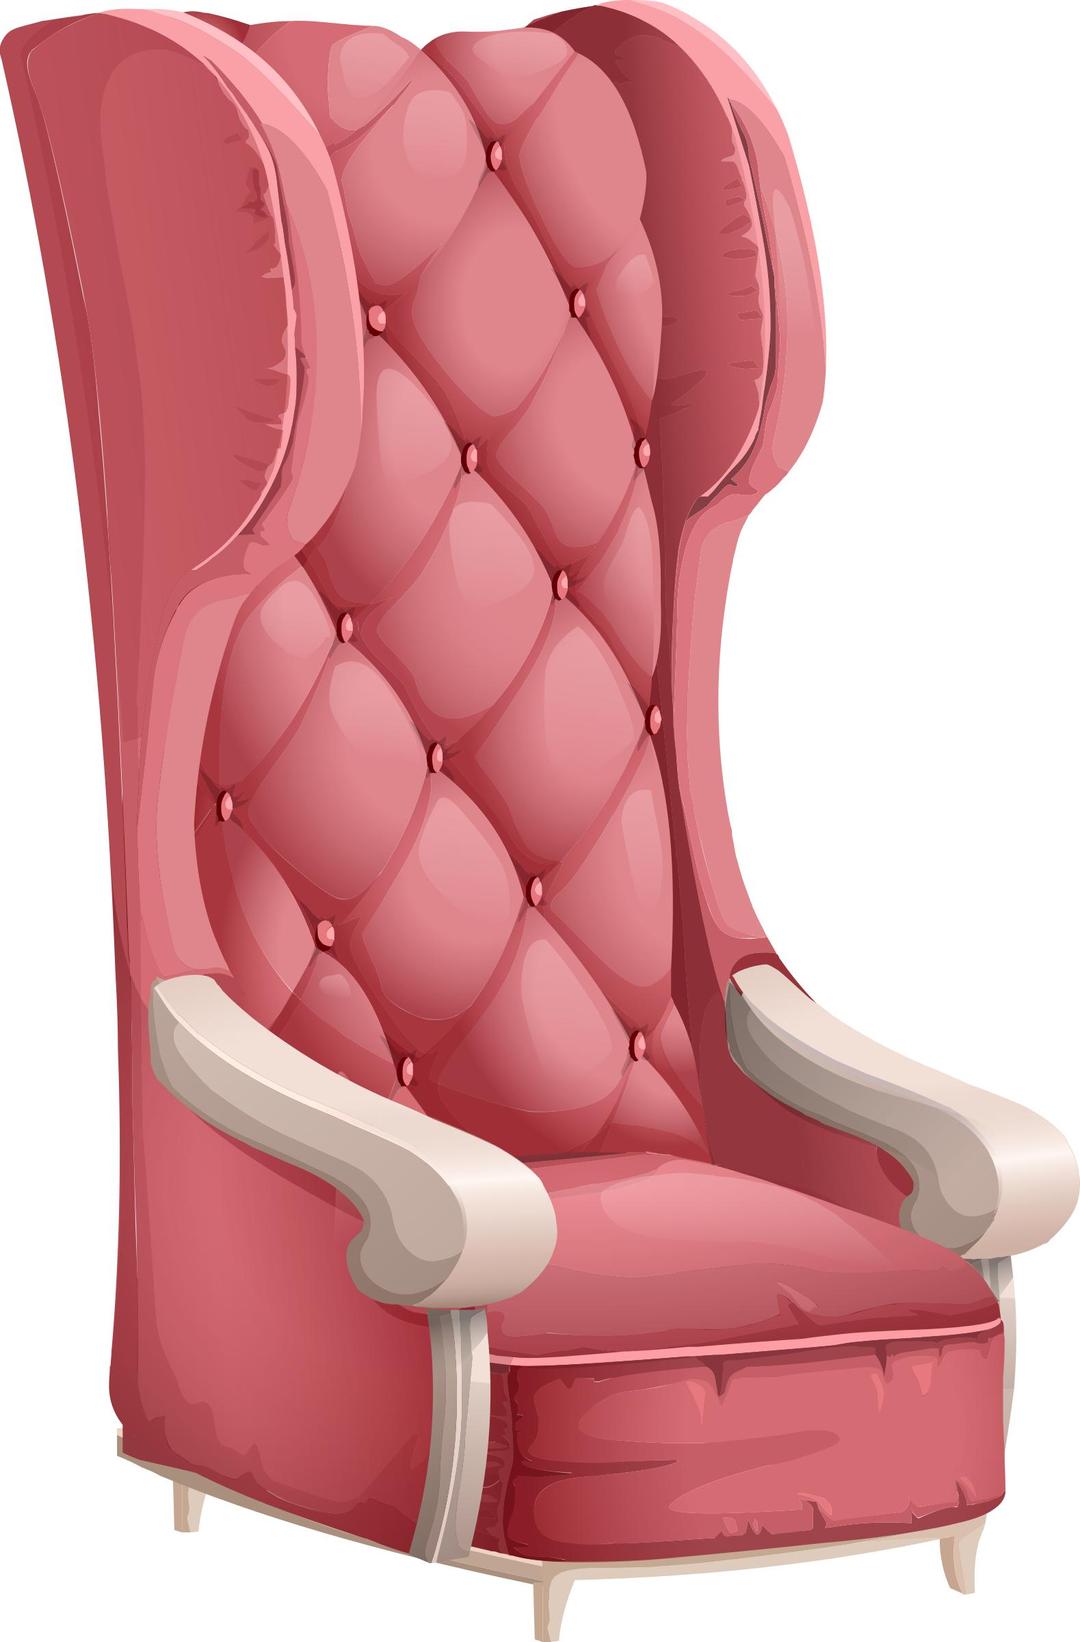 Old-fashioned fancy chair png transparent